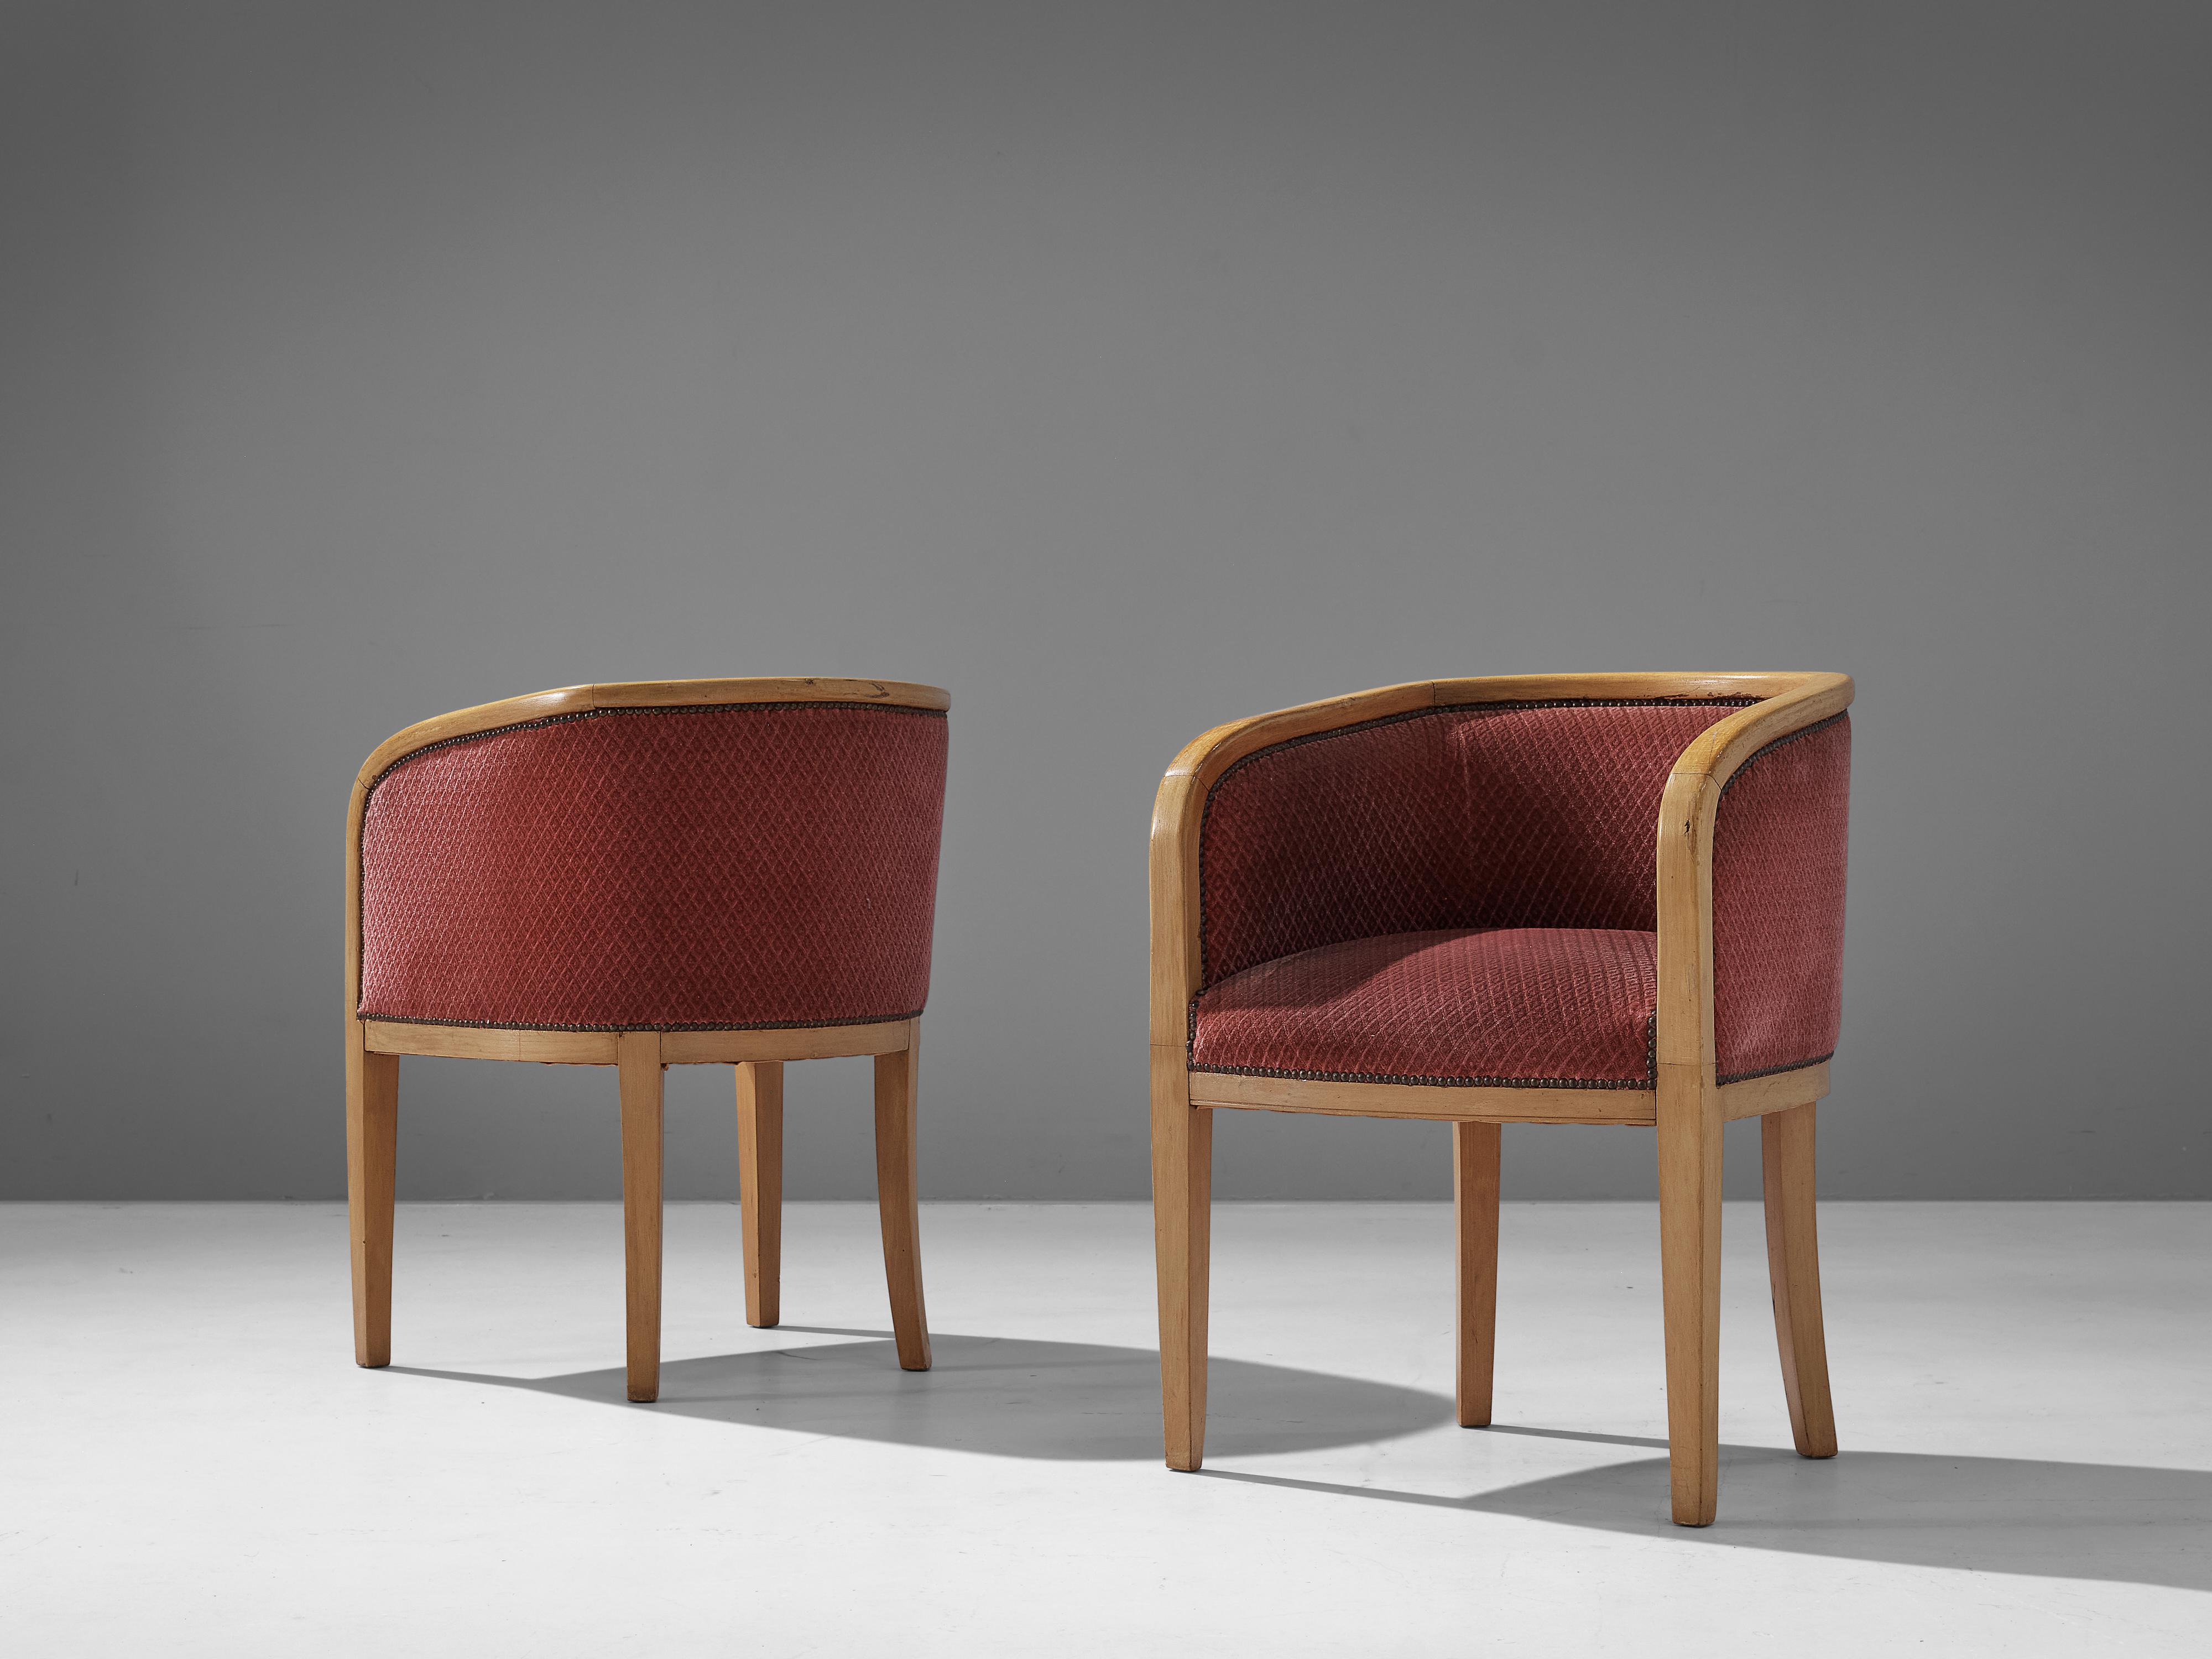 Pair of armchairs, fabric, brass, beech, Denmark, 1950s

A bright frame in beech wood curves around the seat and backrest. Both chairs are upholstered in a soft pink fabric that is attached to the frame with brass nails. From the back, the chair is